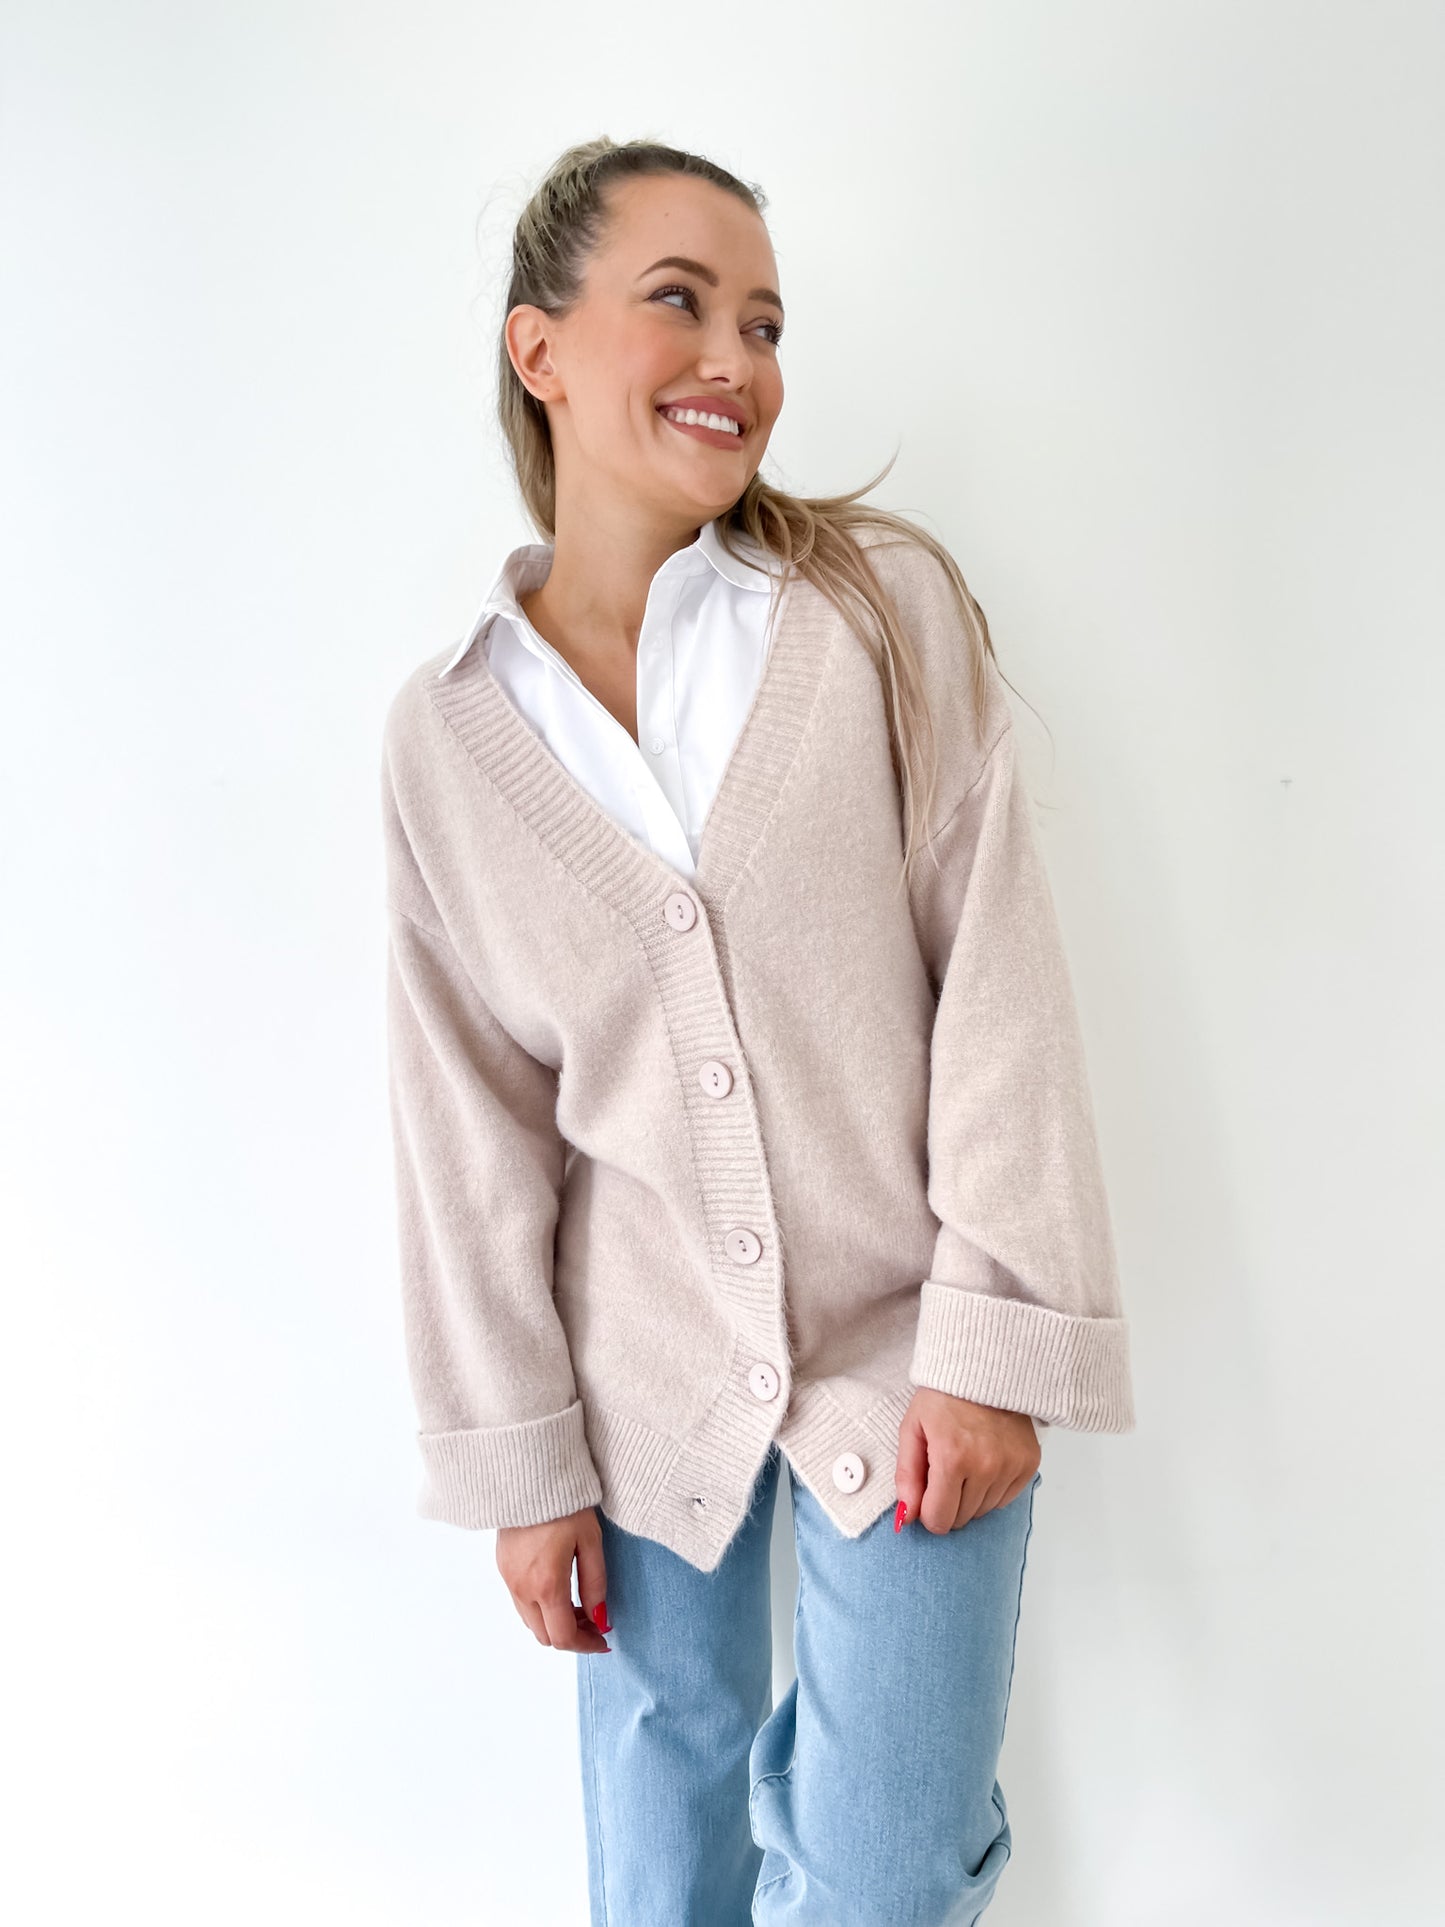 Stone Coloured Winter Cardigan with a generous oversize fit and wide cuffs by Fria the Label.